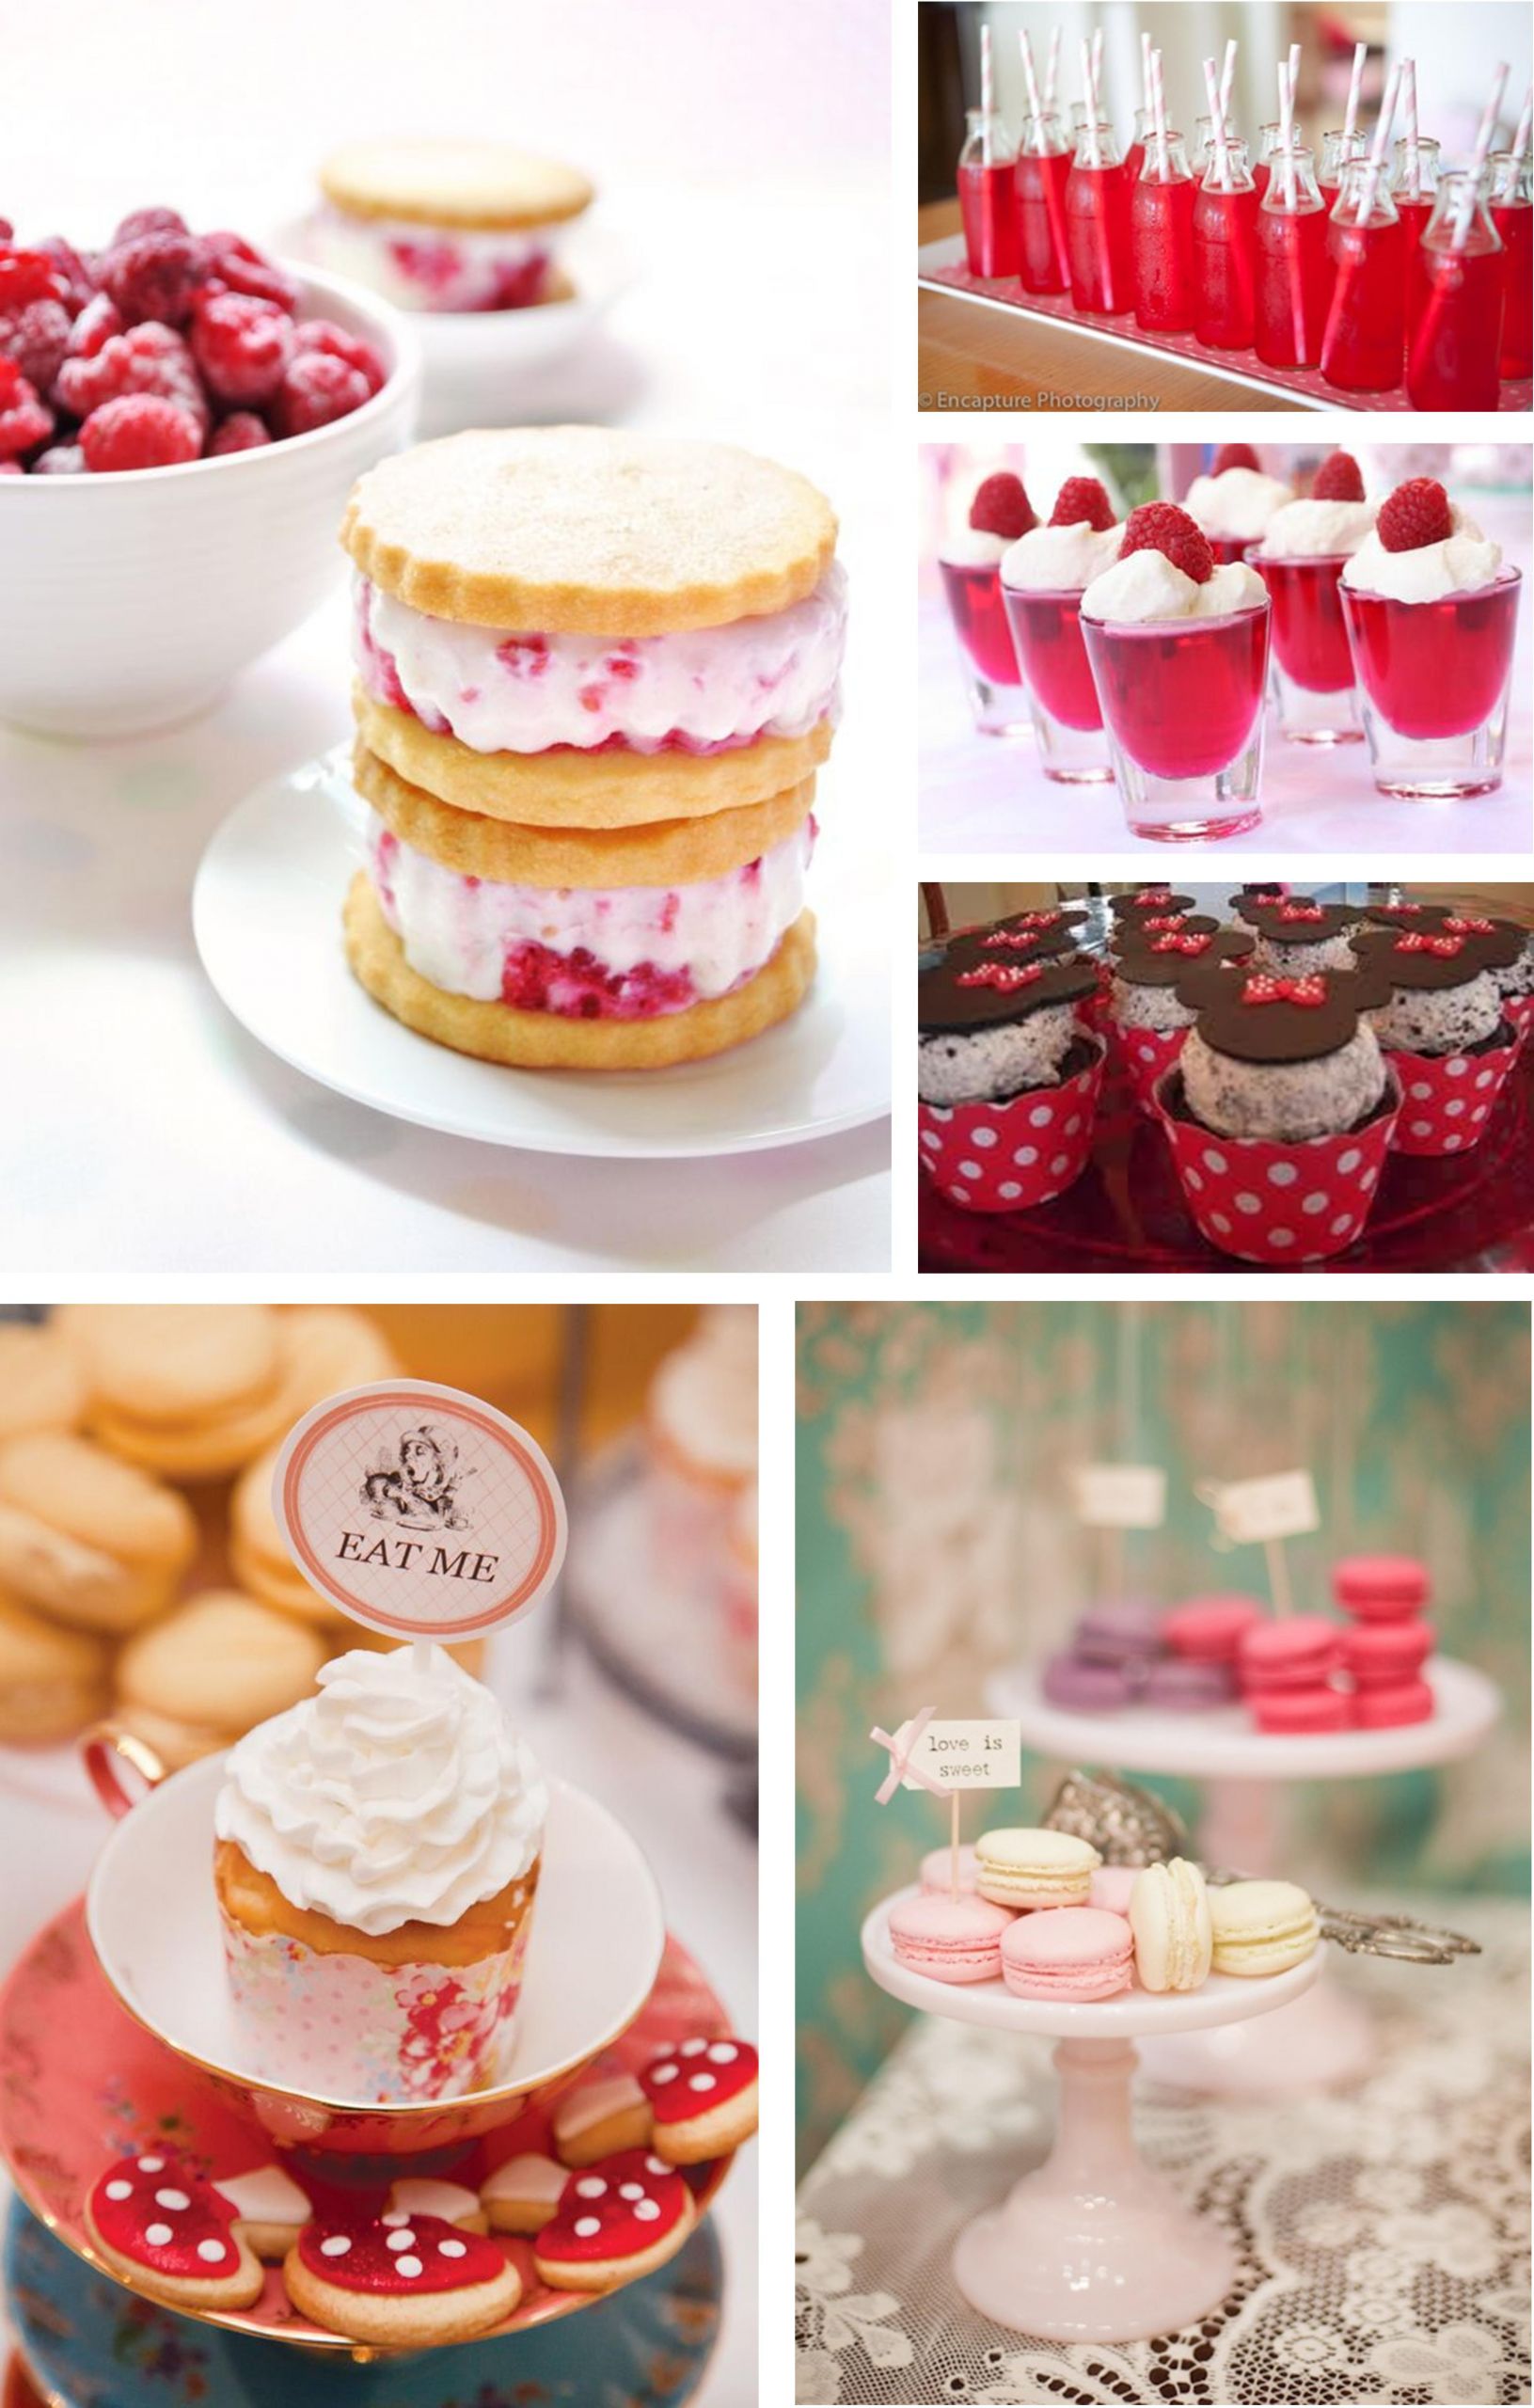 Pink Party Food Ideas
 My little vintage caravan Pink party food ideas